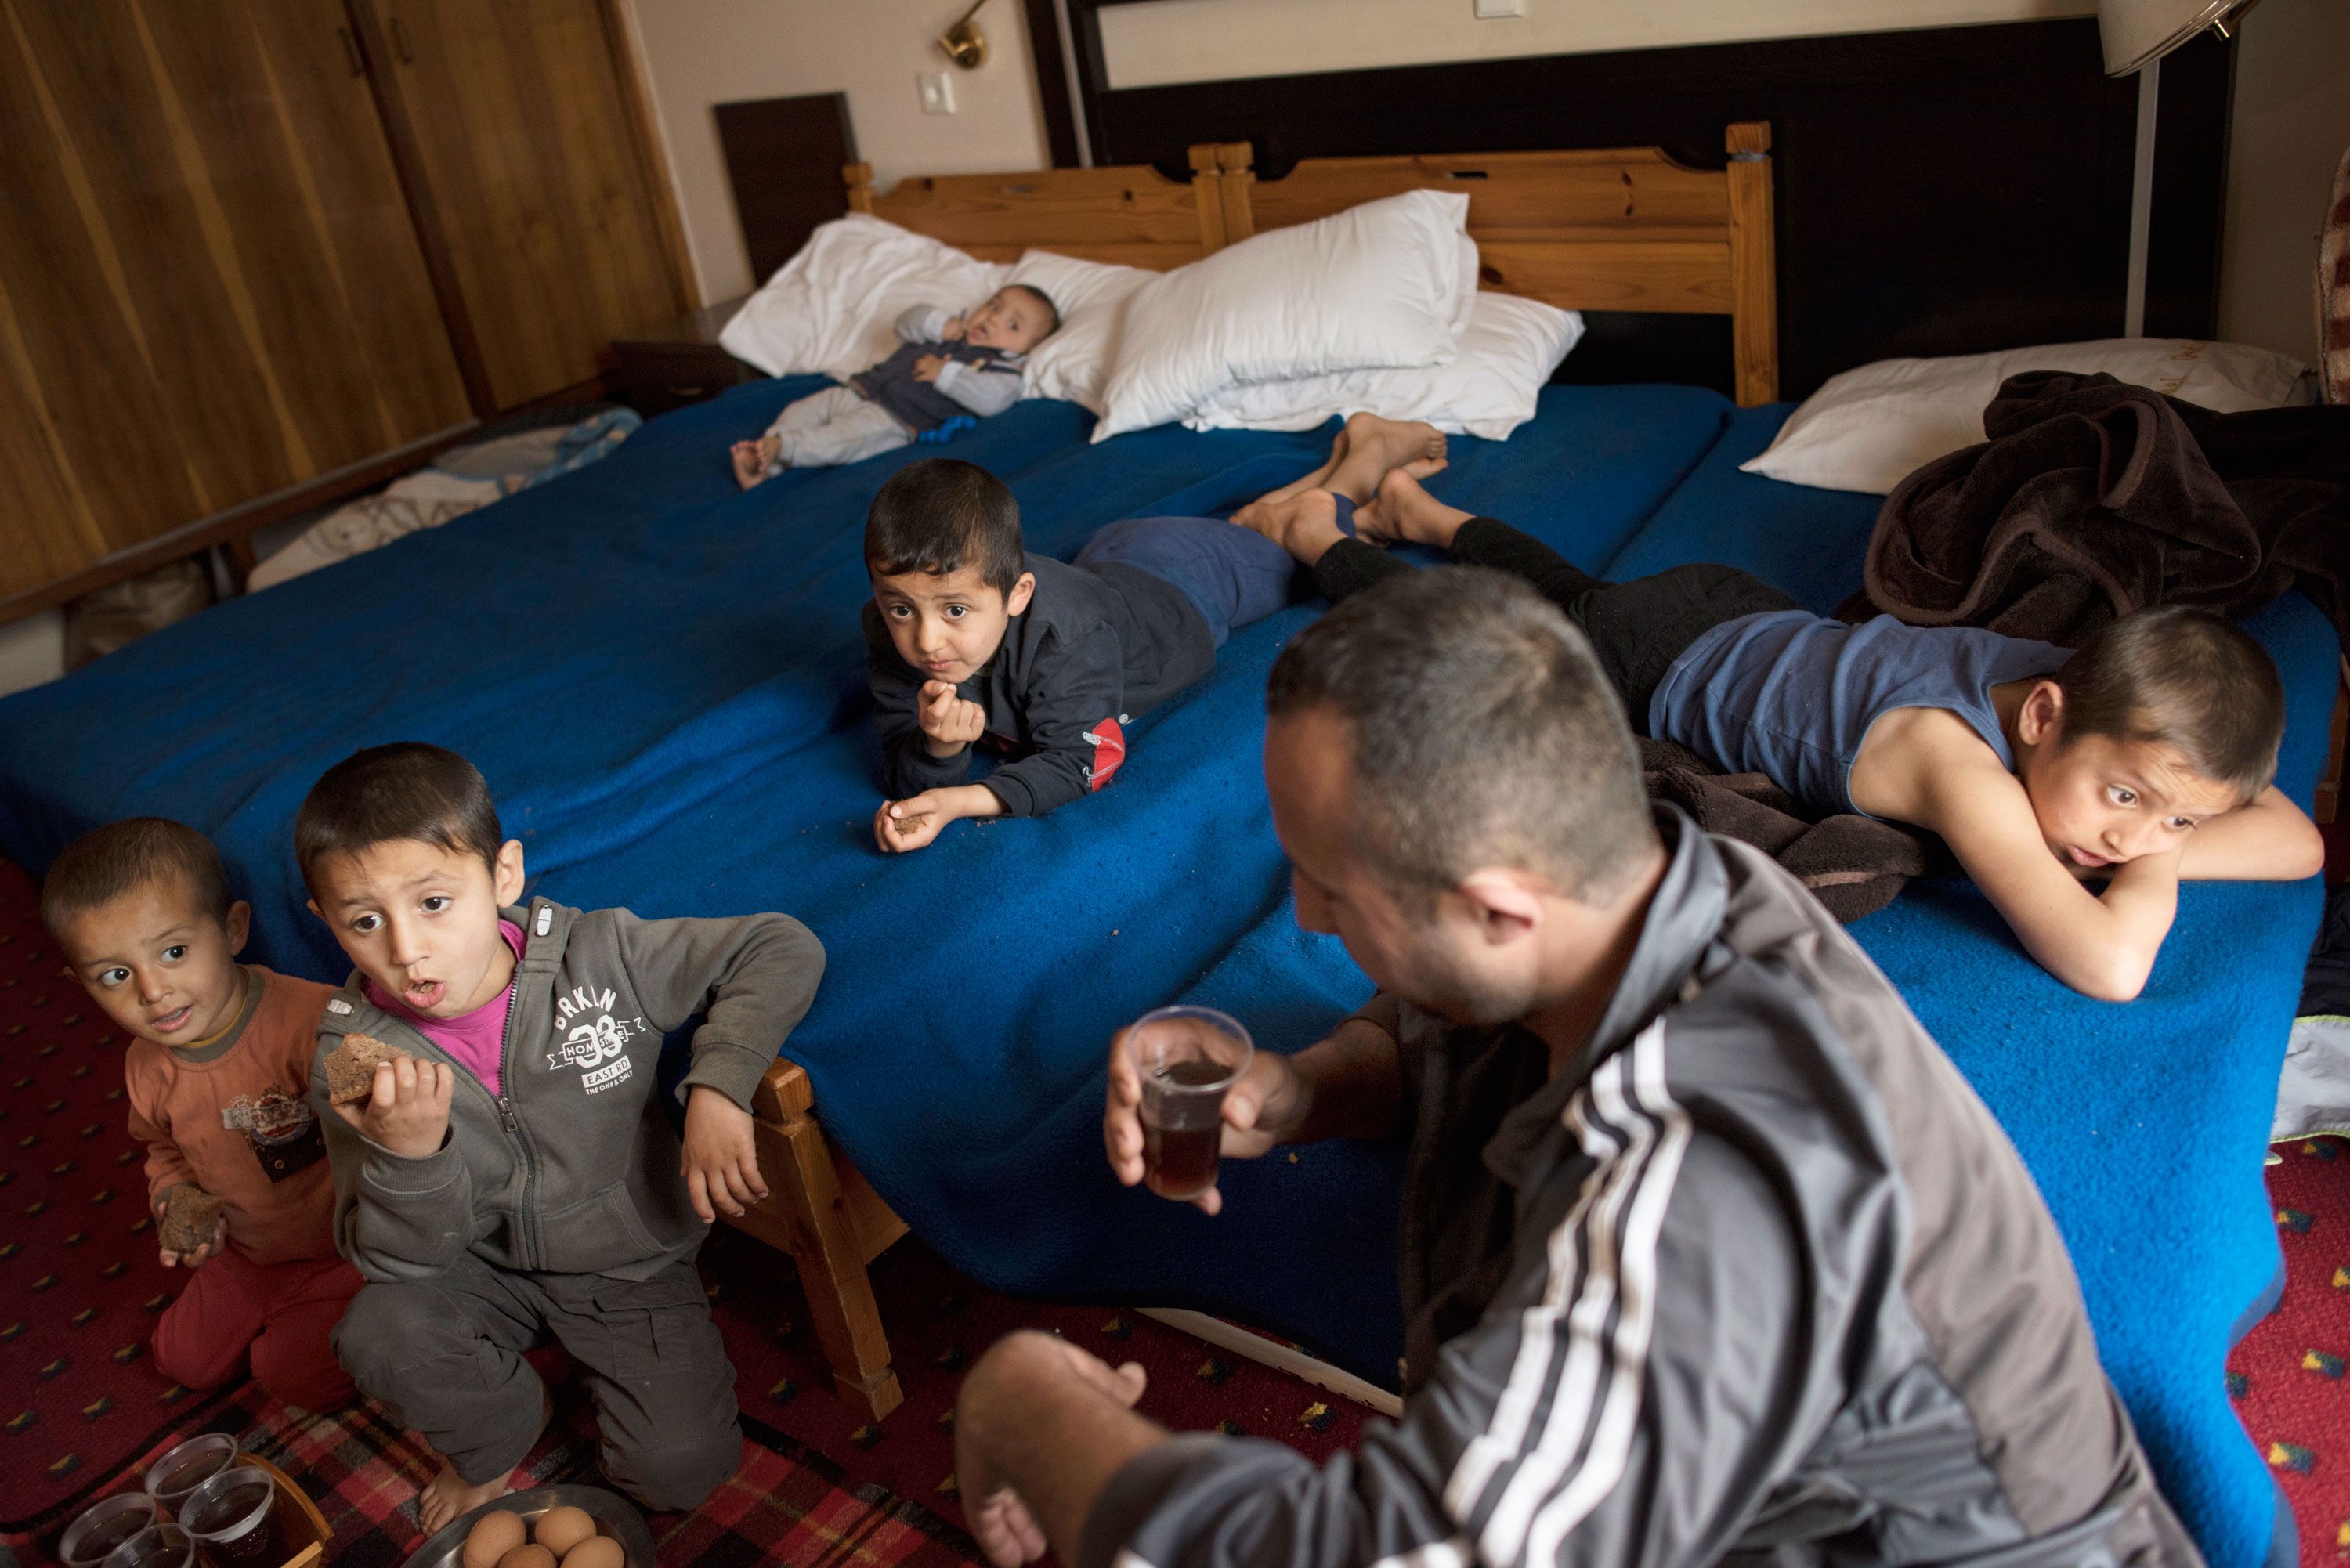 Minhel drinks tea while his children watch television in a hotel in Kastoria, Greece, near the Albanian border. Image by Lynsey Addario. Greece, 2017.